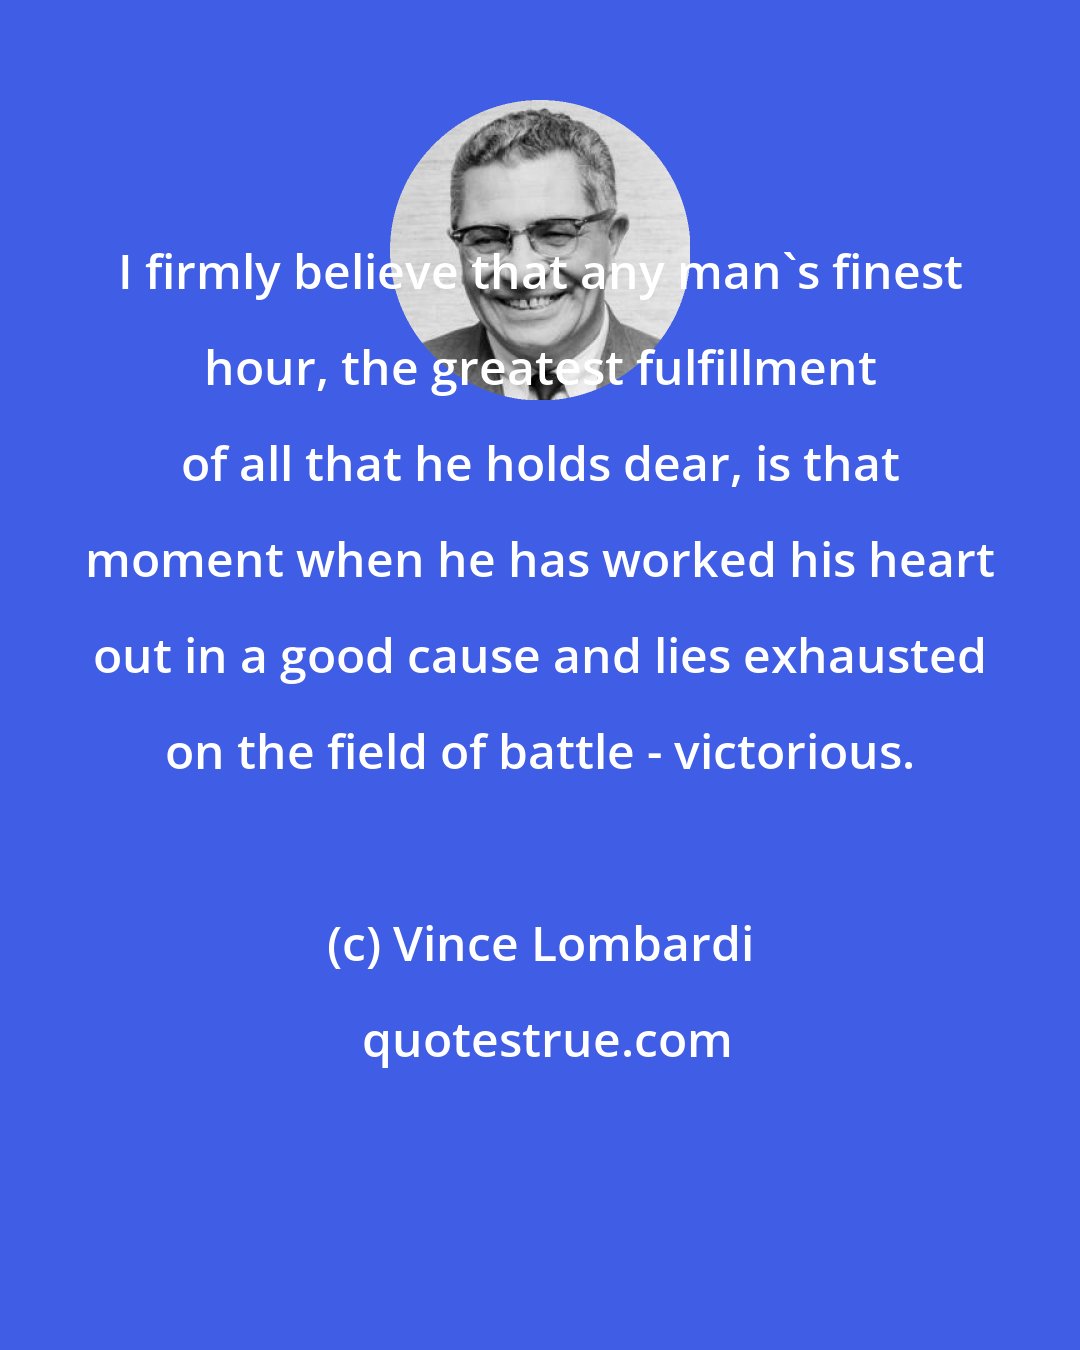 Vince Lombardi: I firmly believe that any man's finest hour, the greatest fulfillment of all that he holds dear, is that moment when he has worked his heart out in a good cause and lies exhausted on the field of battle - victorious.